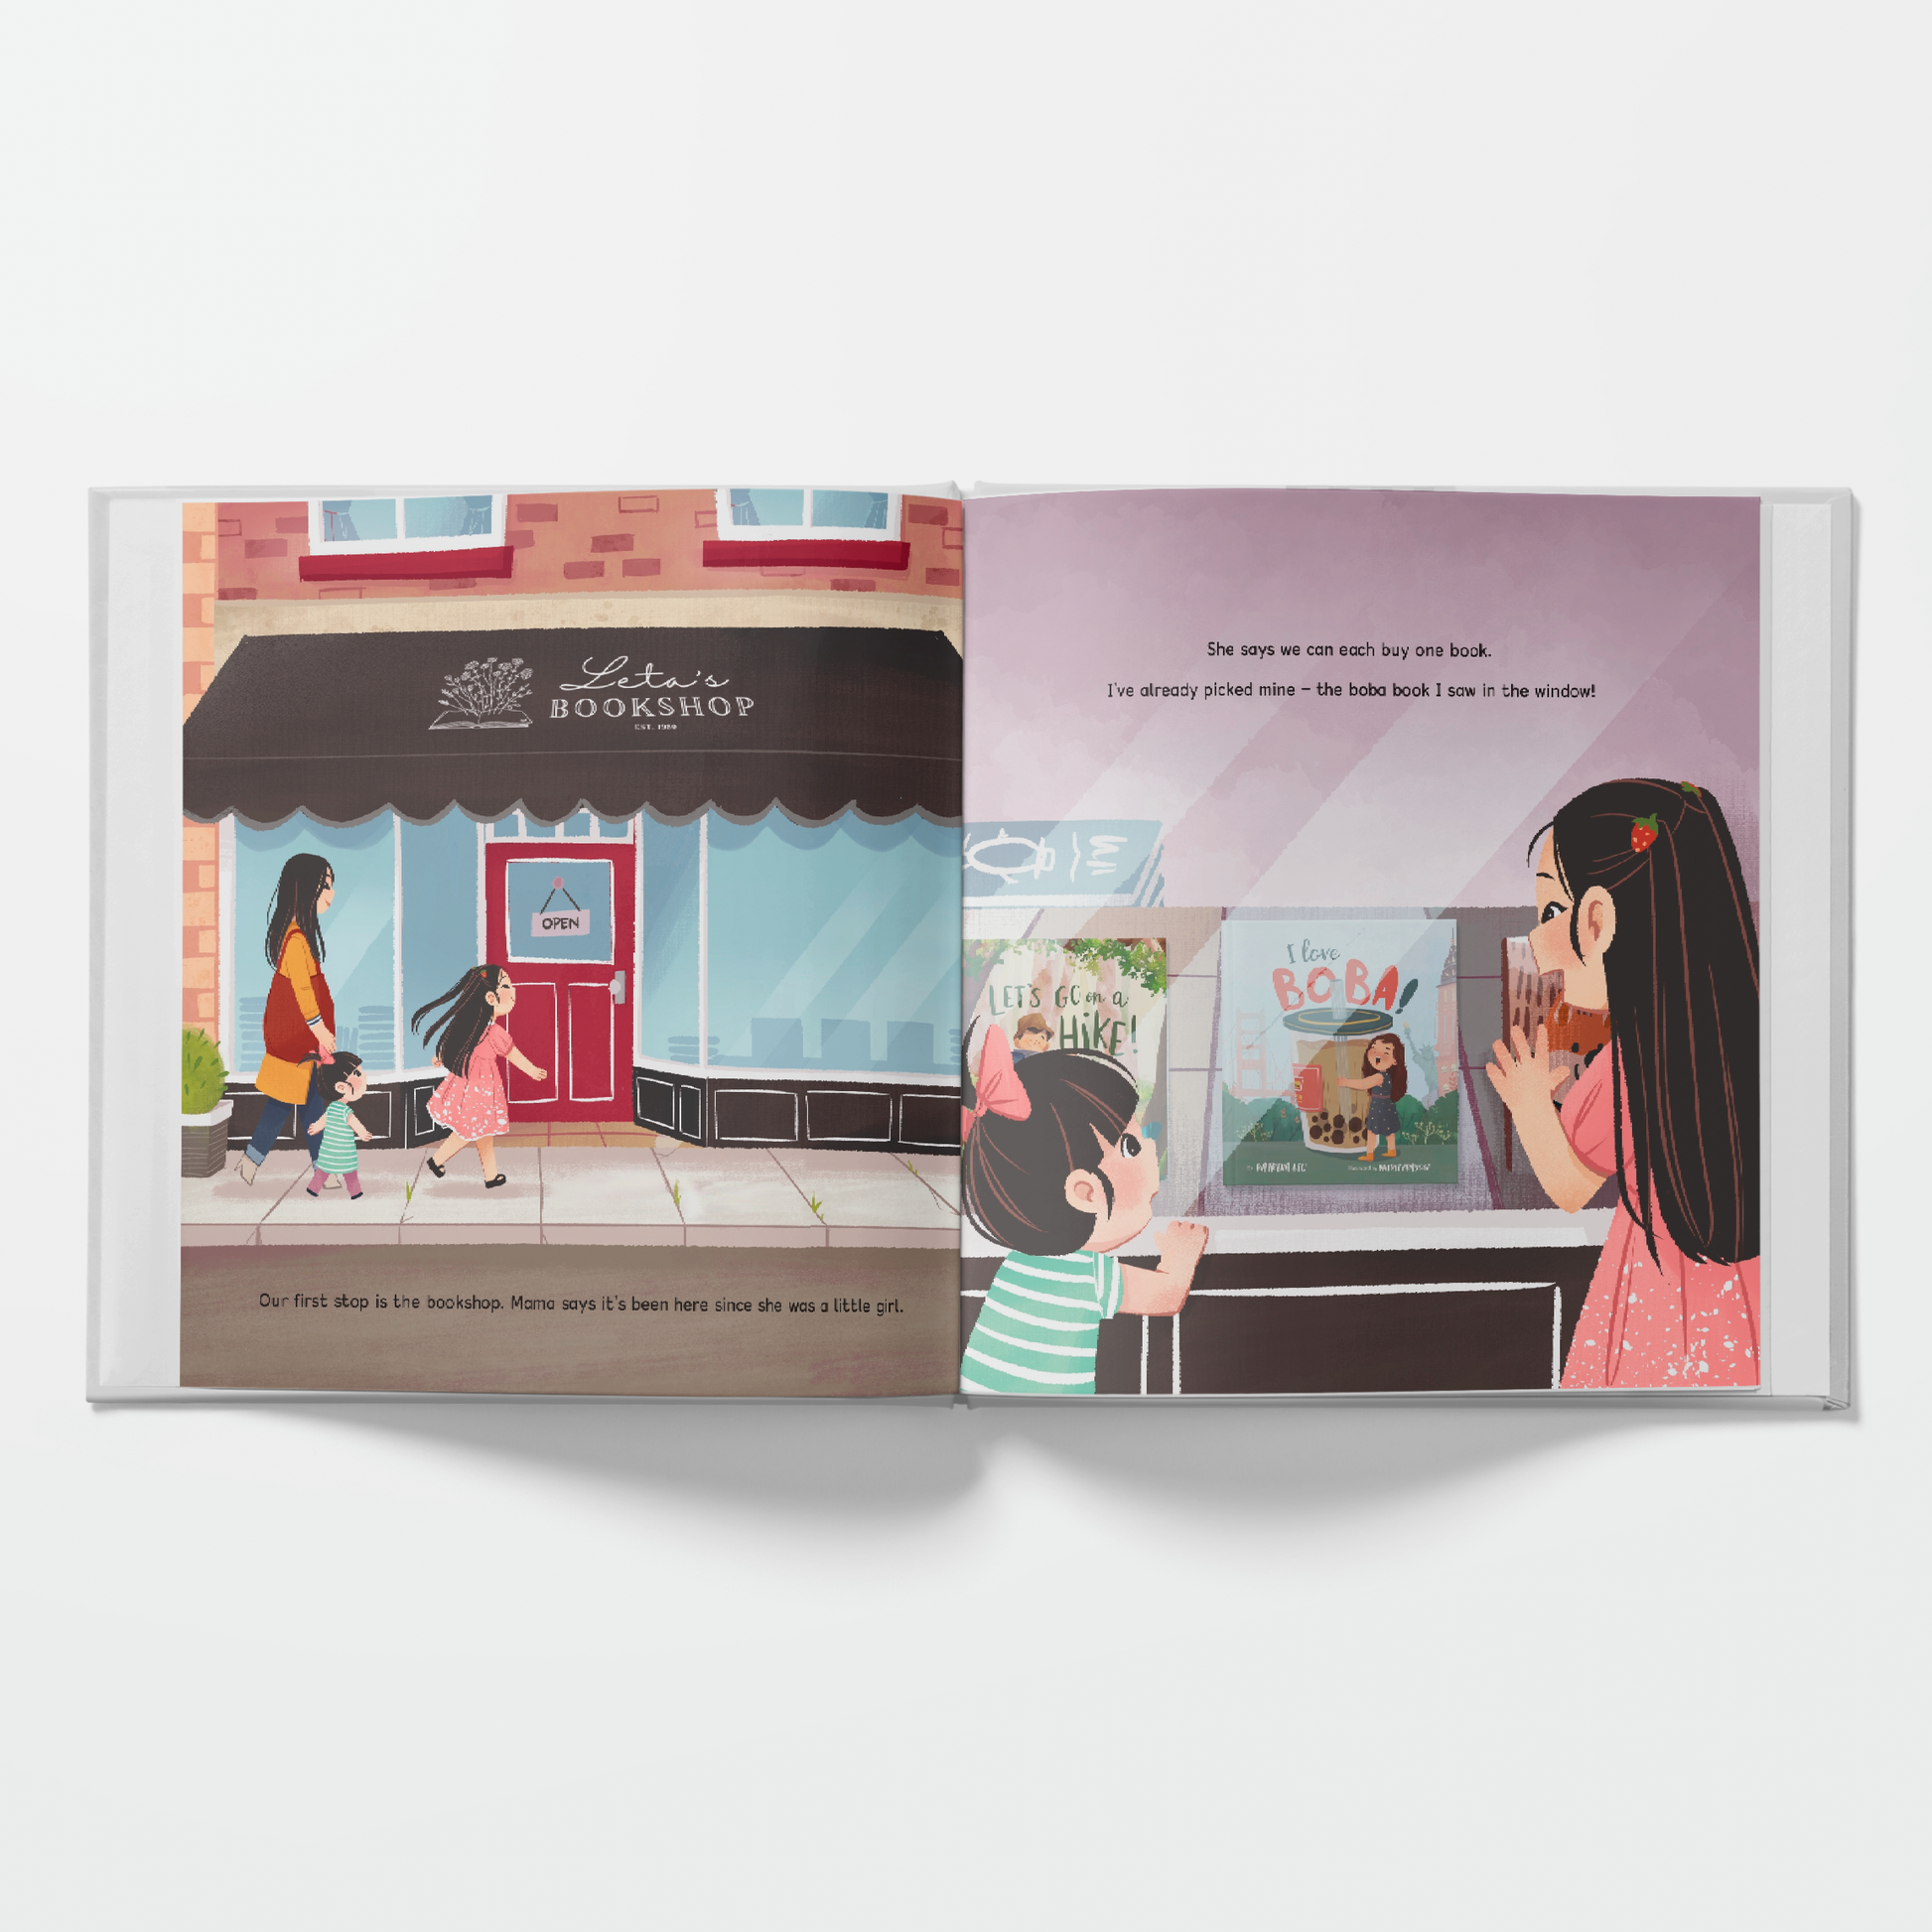 We Shop Small - A Children's Book on Community & Connection